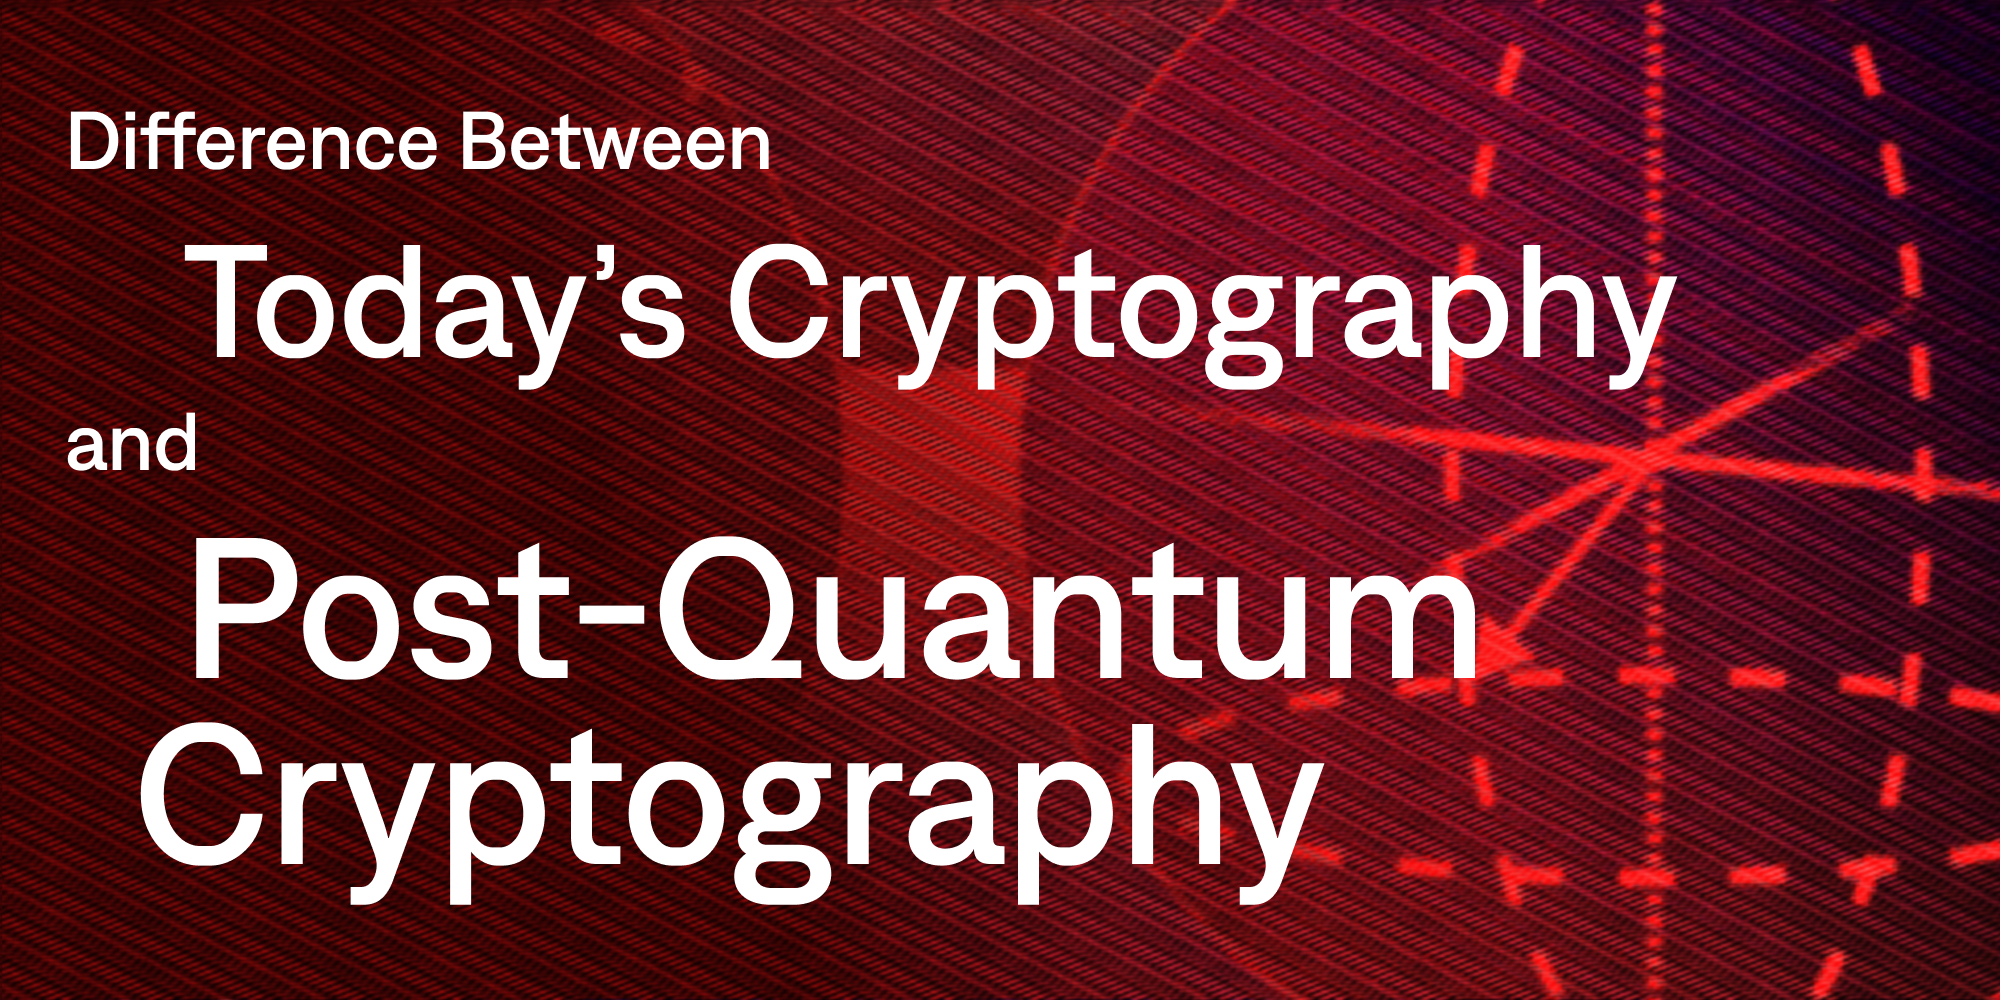 What’s the Difference Between Today’s Cryptography and Post-Quantum Cryptography? cover